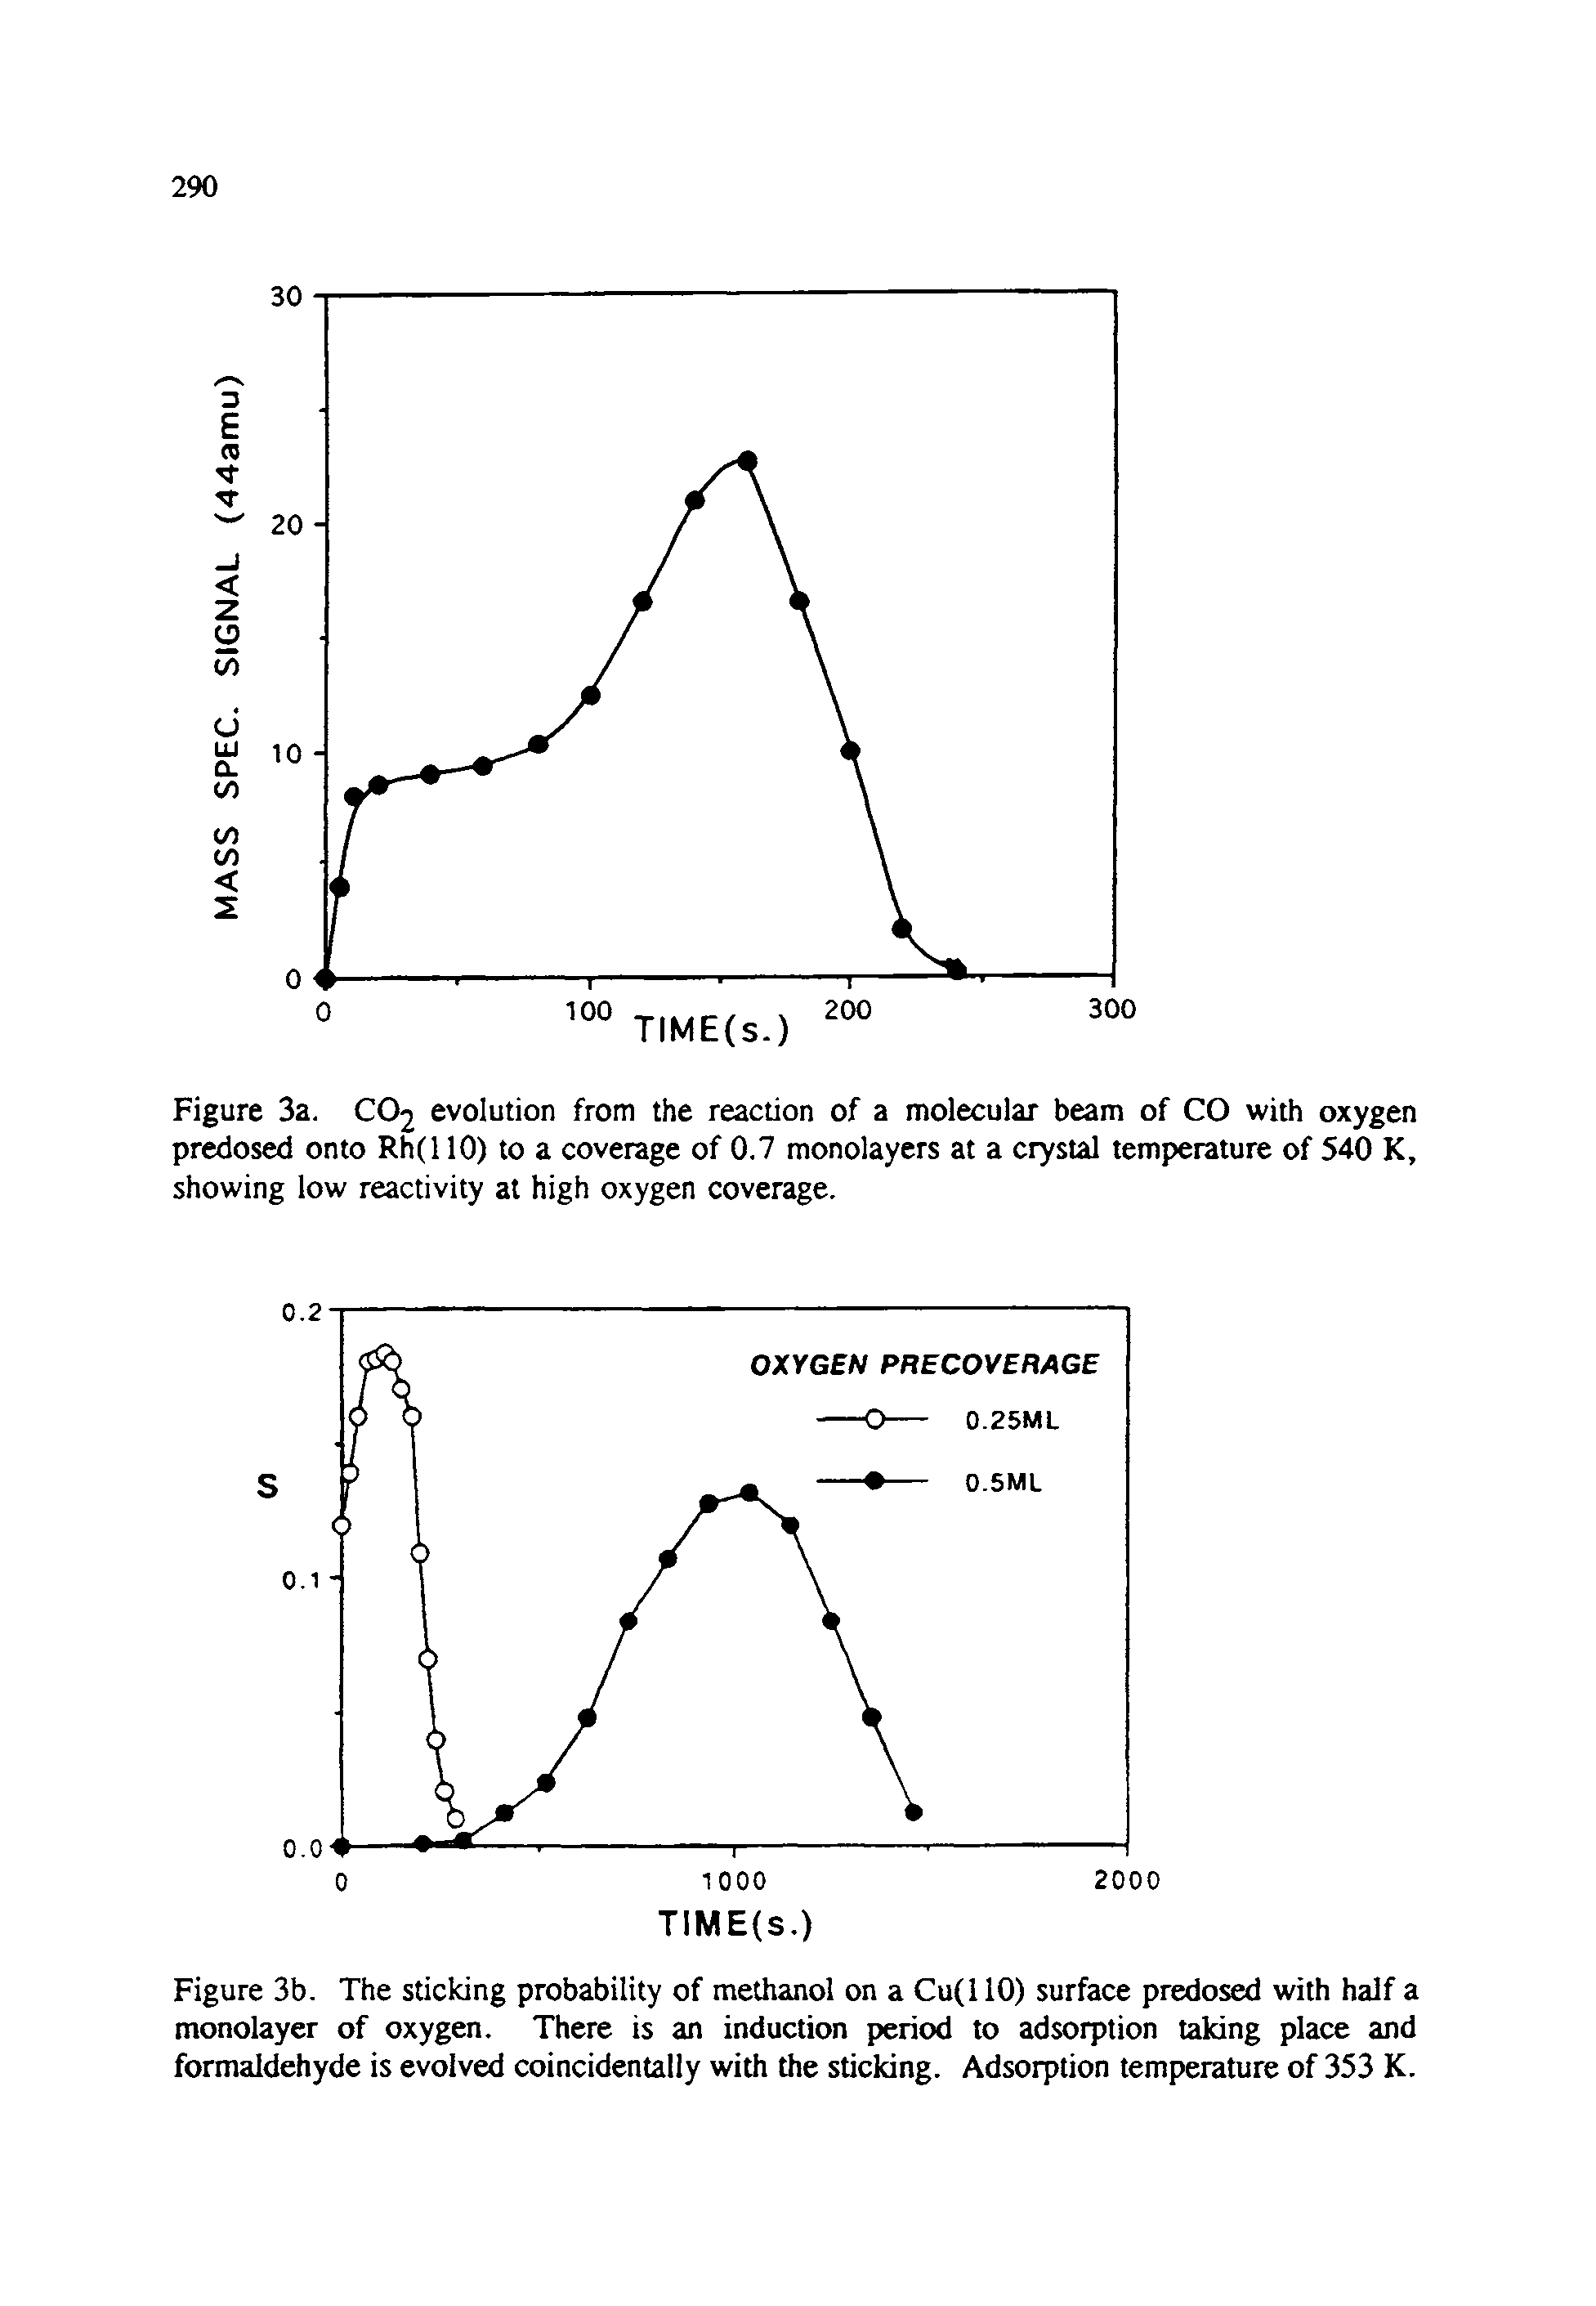 Figure 3a. CO2 evolution from the reaction of a molecular beam of CO with oxygen predosed onto Rh(l 10) to a coverage of 0.7 monolayers at a crystal temperature of 540 K, showing low reactivity at high oxygen coverage.